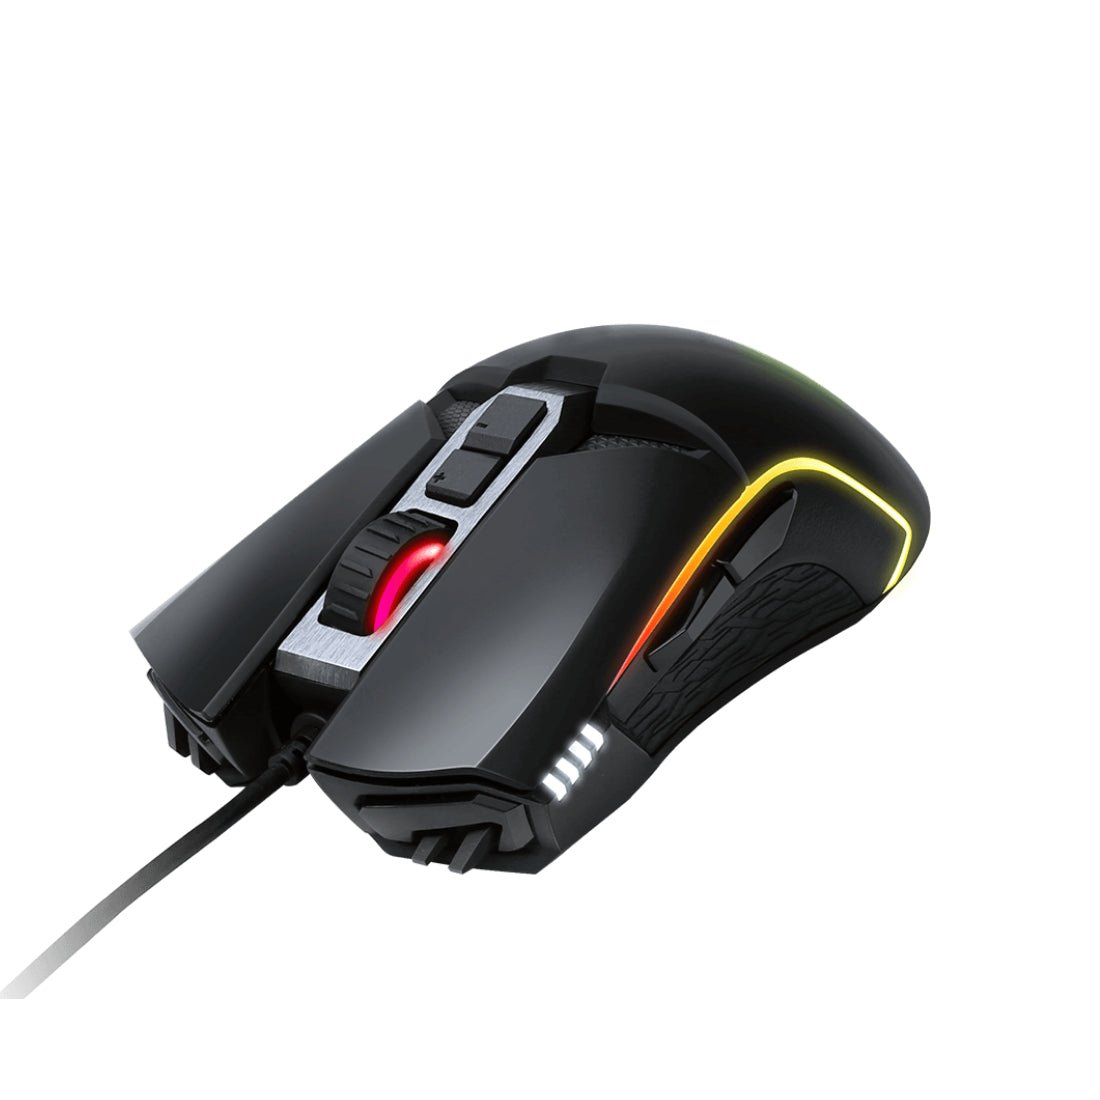 Gigabyte Aorus M5 Wired Gaming Mouse - Matte Black - Store 974 | ستور ٩٧٤